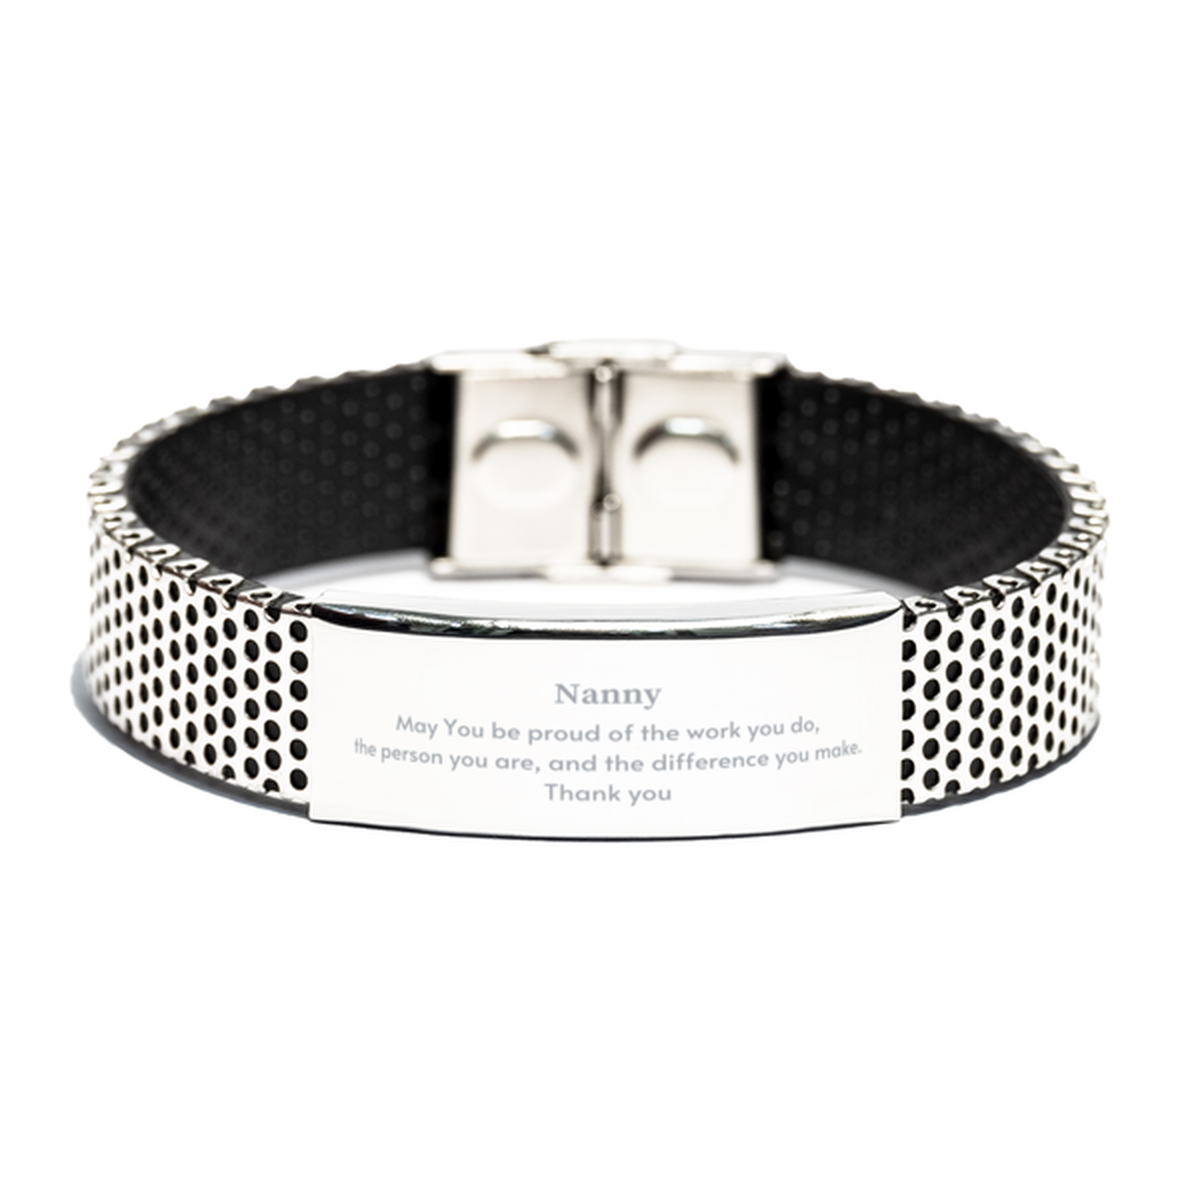 Heartwarming Stainless Steel Bracelet Retirement Coworkers Gifts for Nanny, Nanny May You be proud of the work you do, the person you are Gifts for Boss Men Women Friends